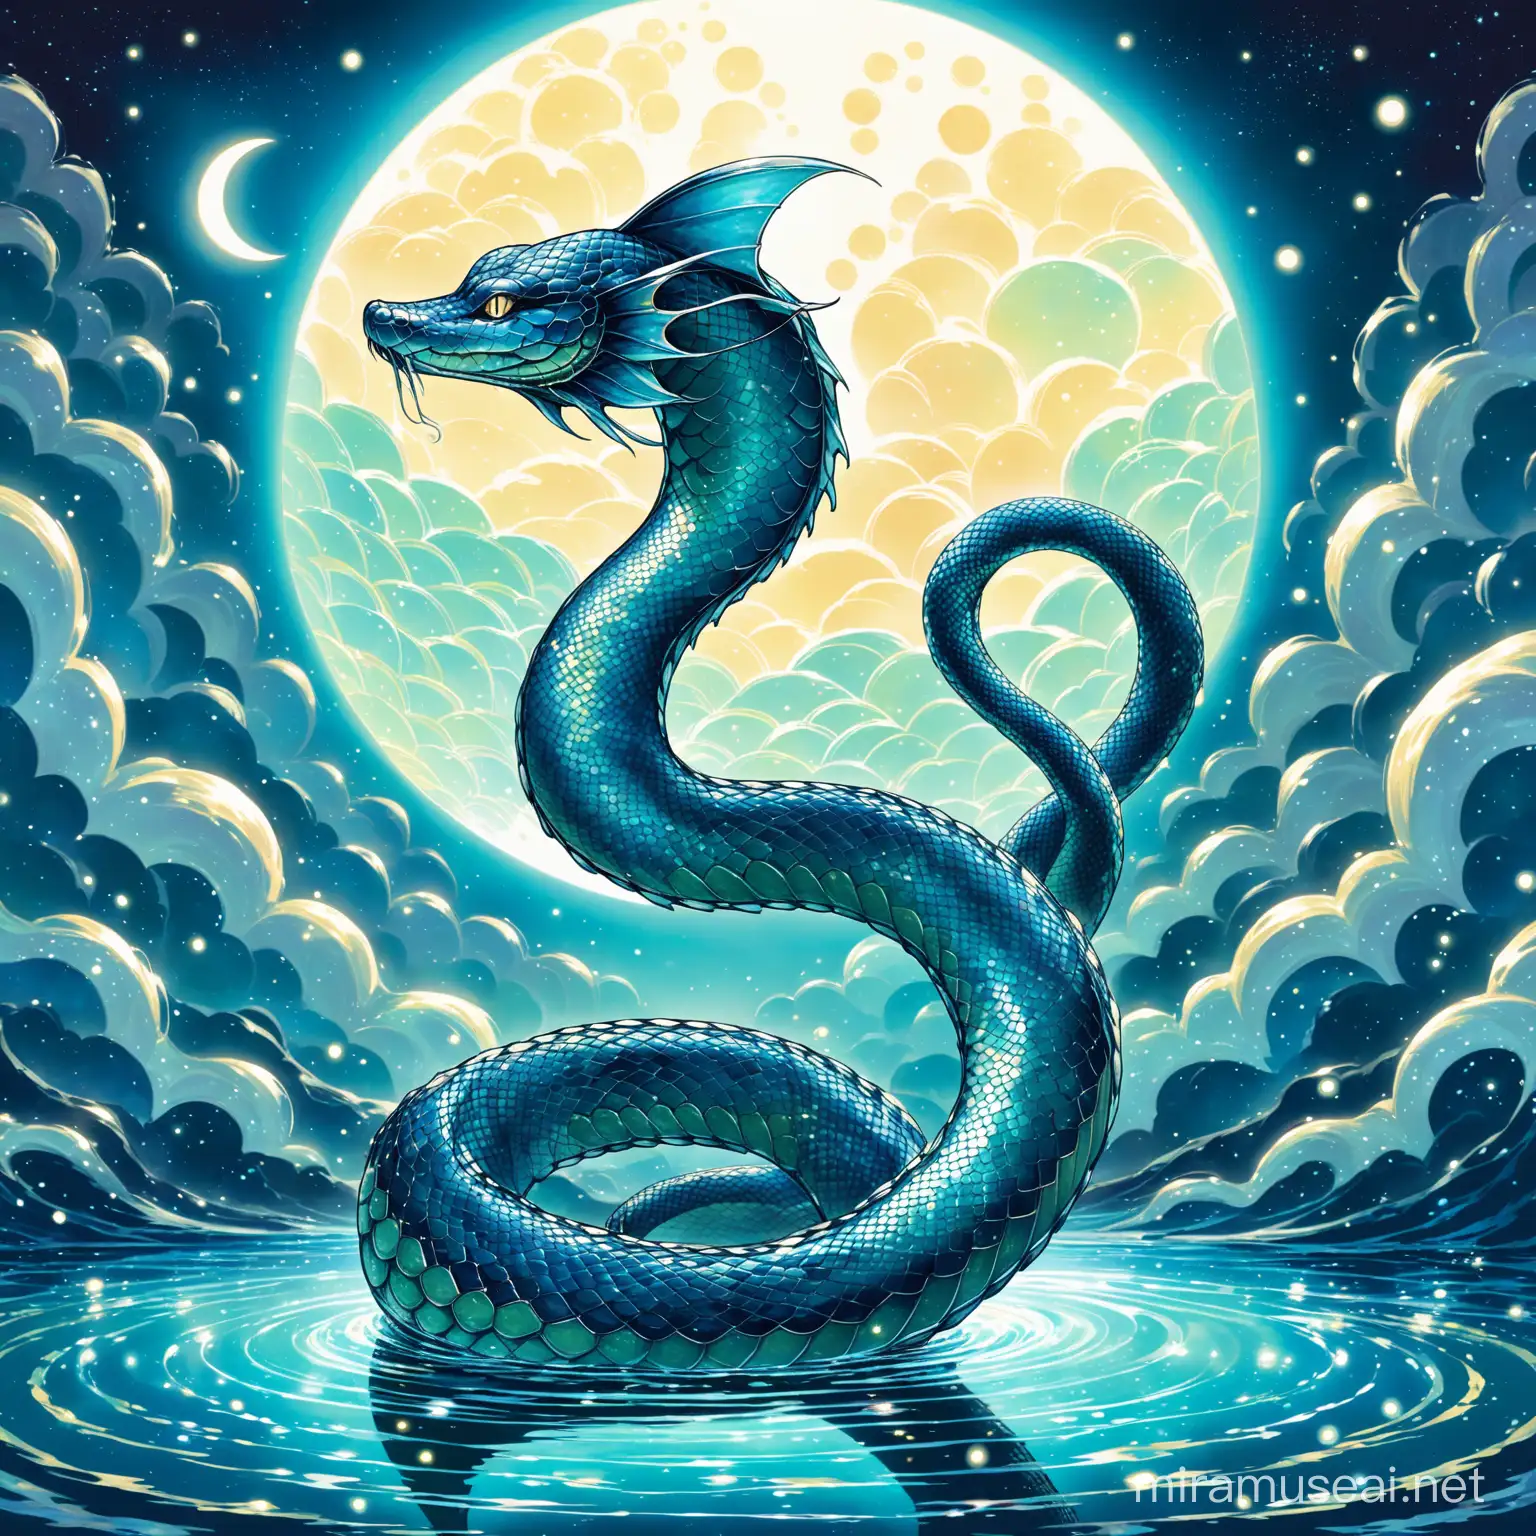 Mystical Serpent with Luminous Eyes and Shimmering Blue Scales